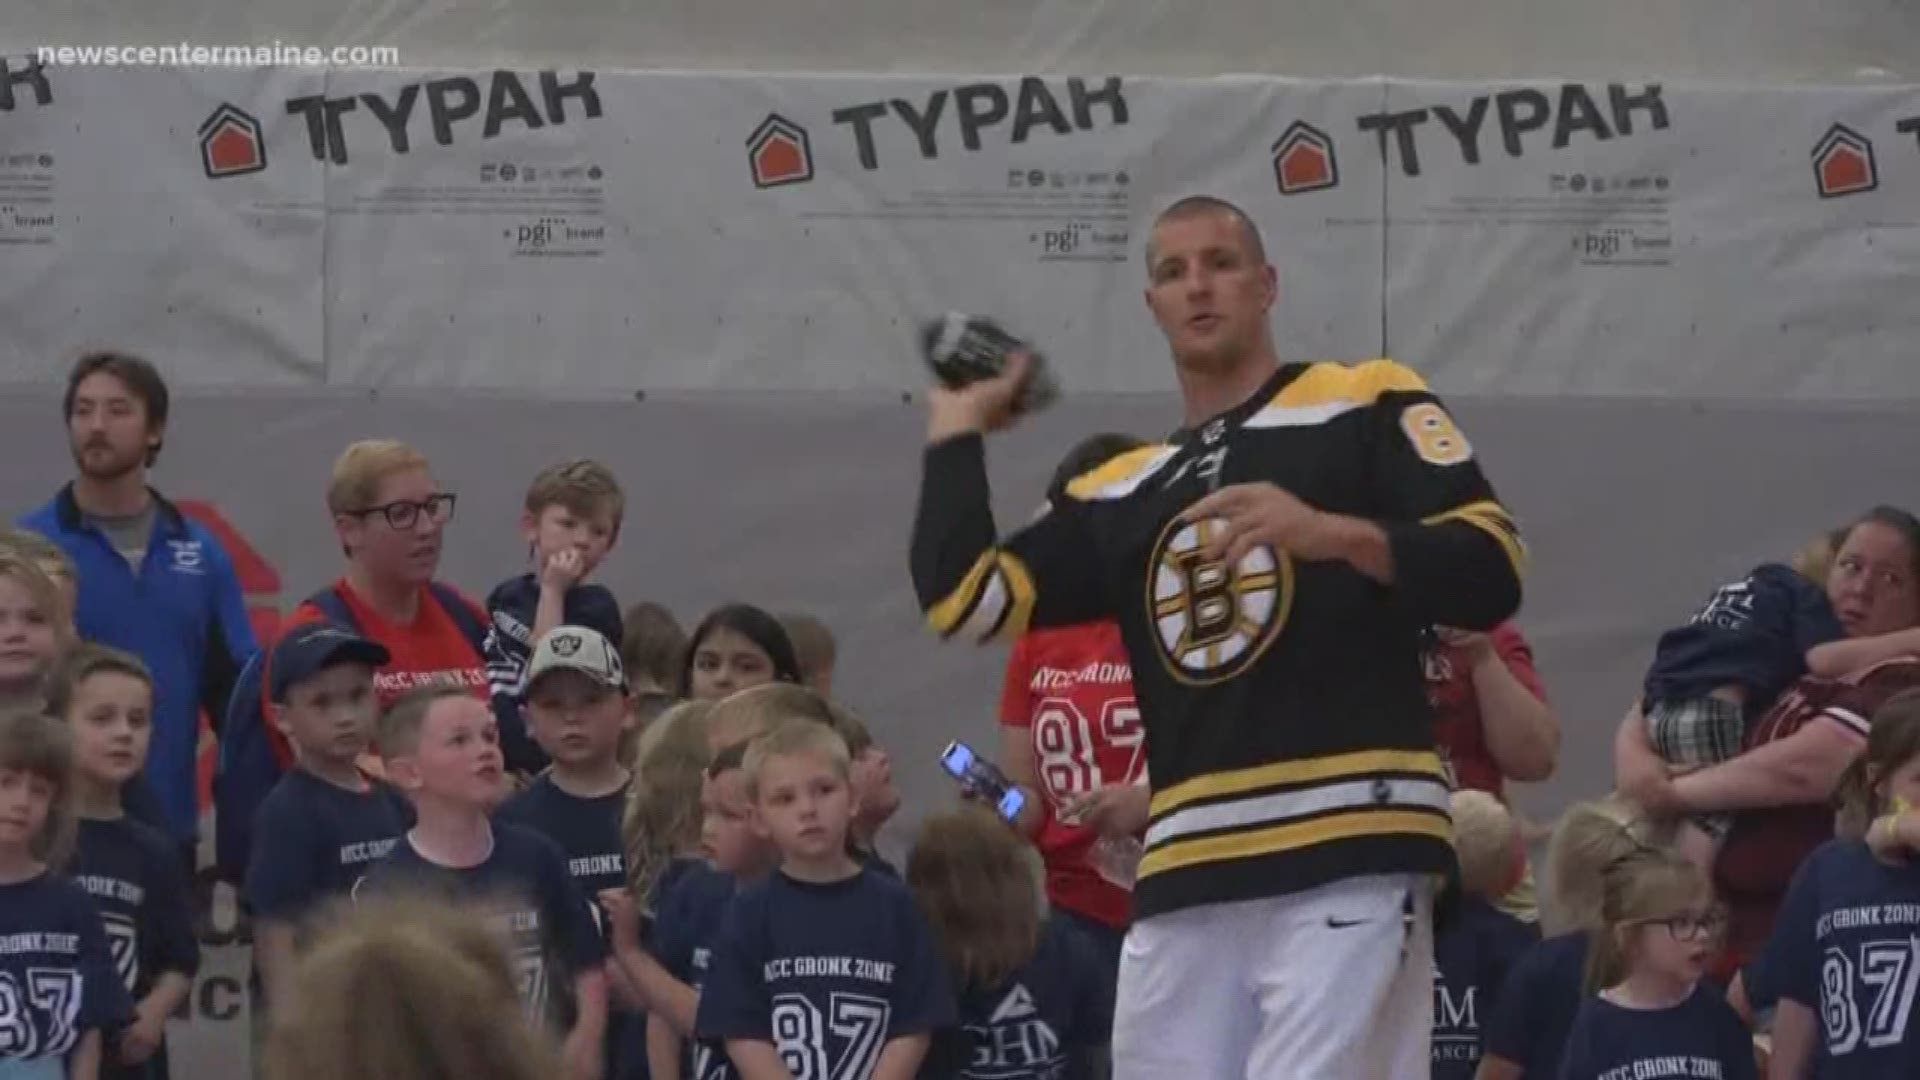 Rob Gronkowski was sporting a Bruins jersey during his visits on Wednesday in support of the fellow Boston team.